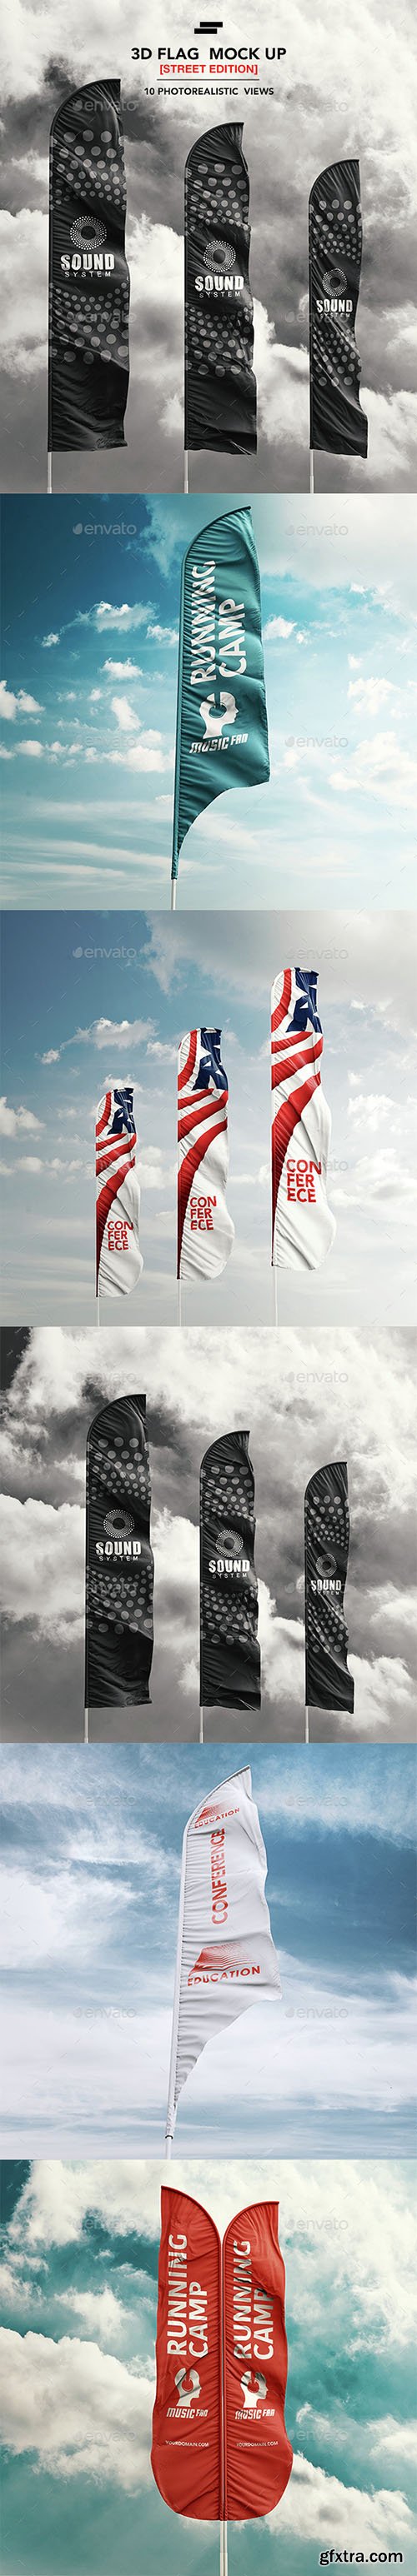 Graphicriver 3D Feather Flags / Bow / Sail Flag Mockup 14621793